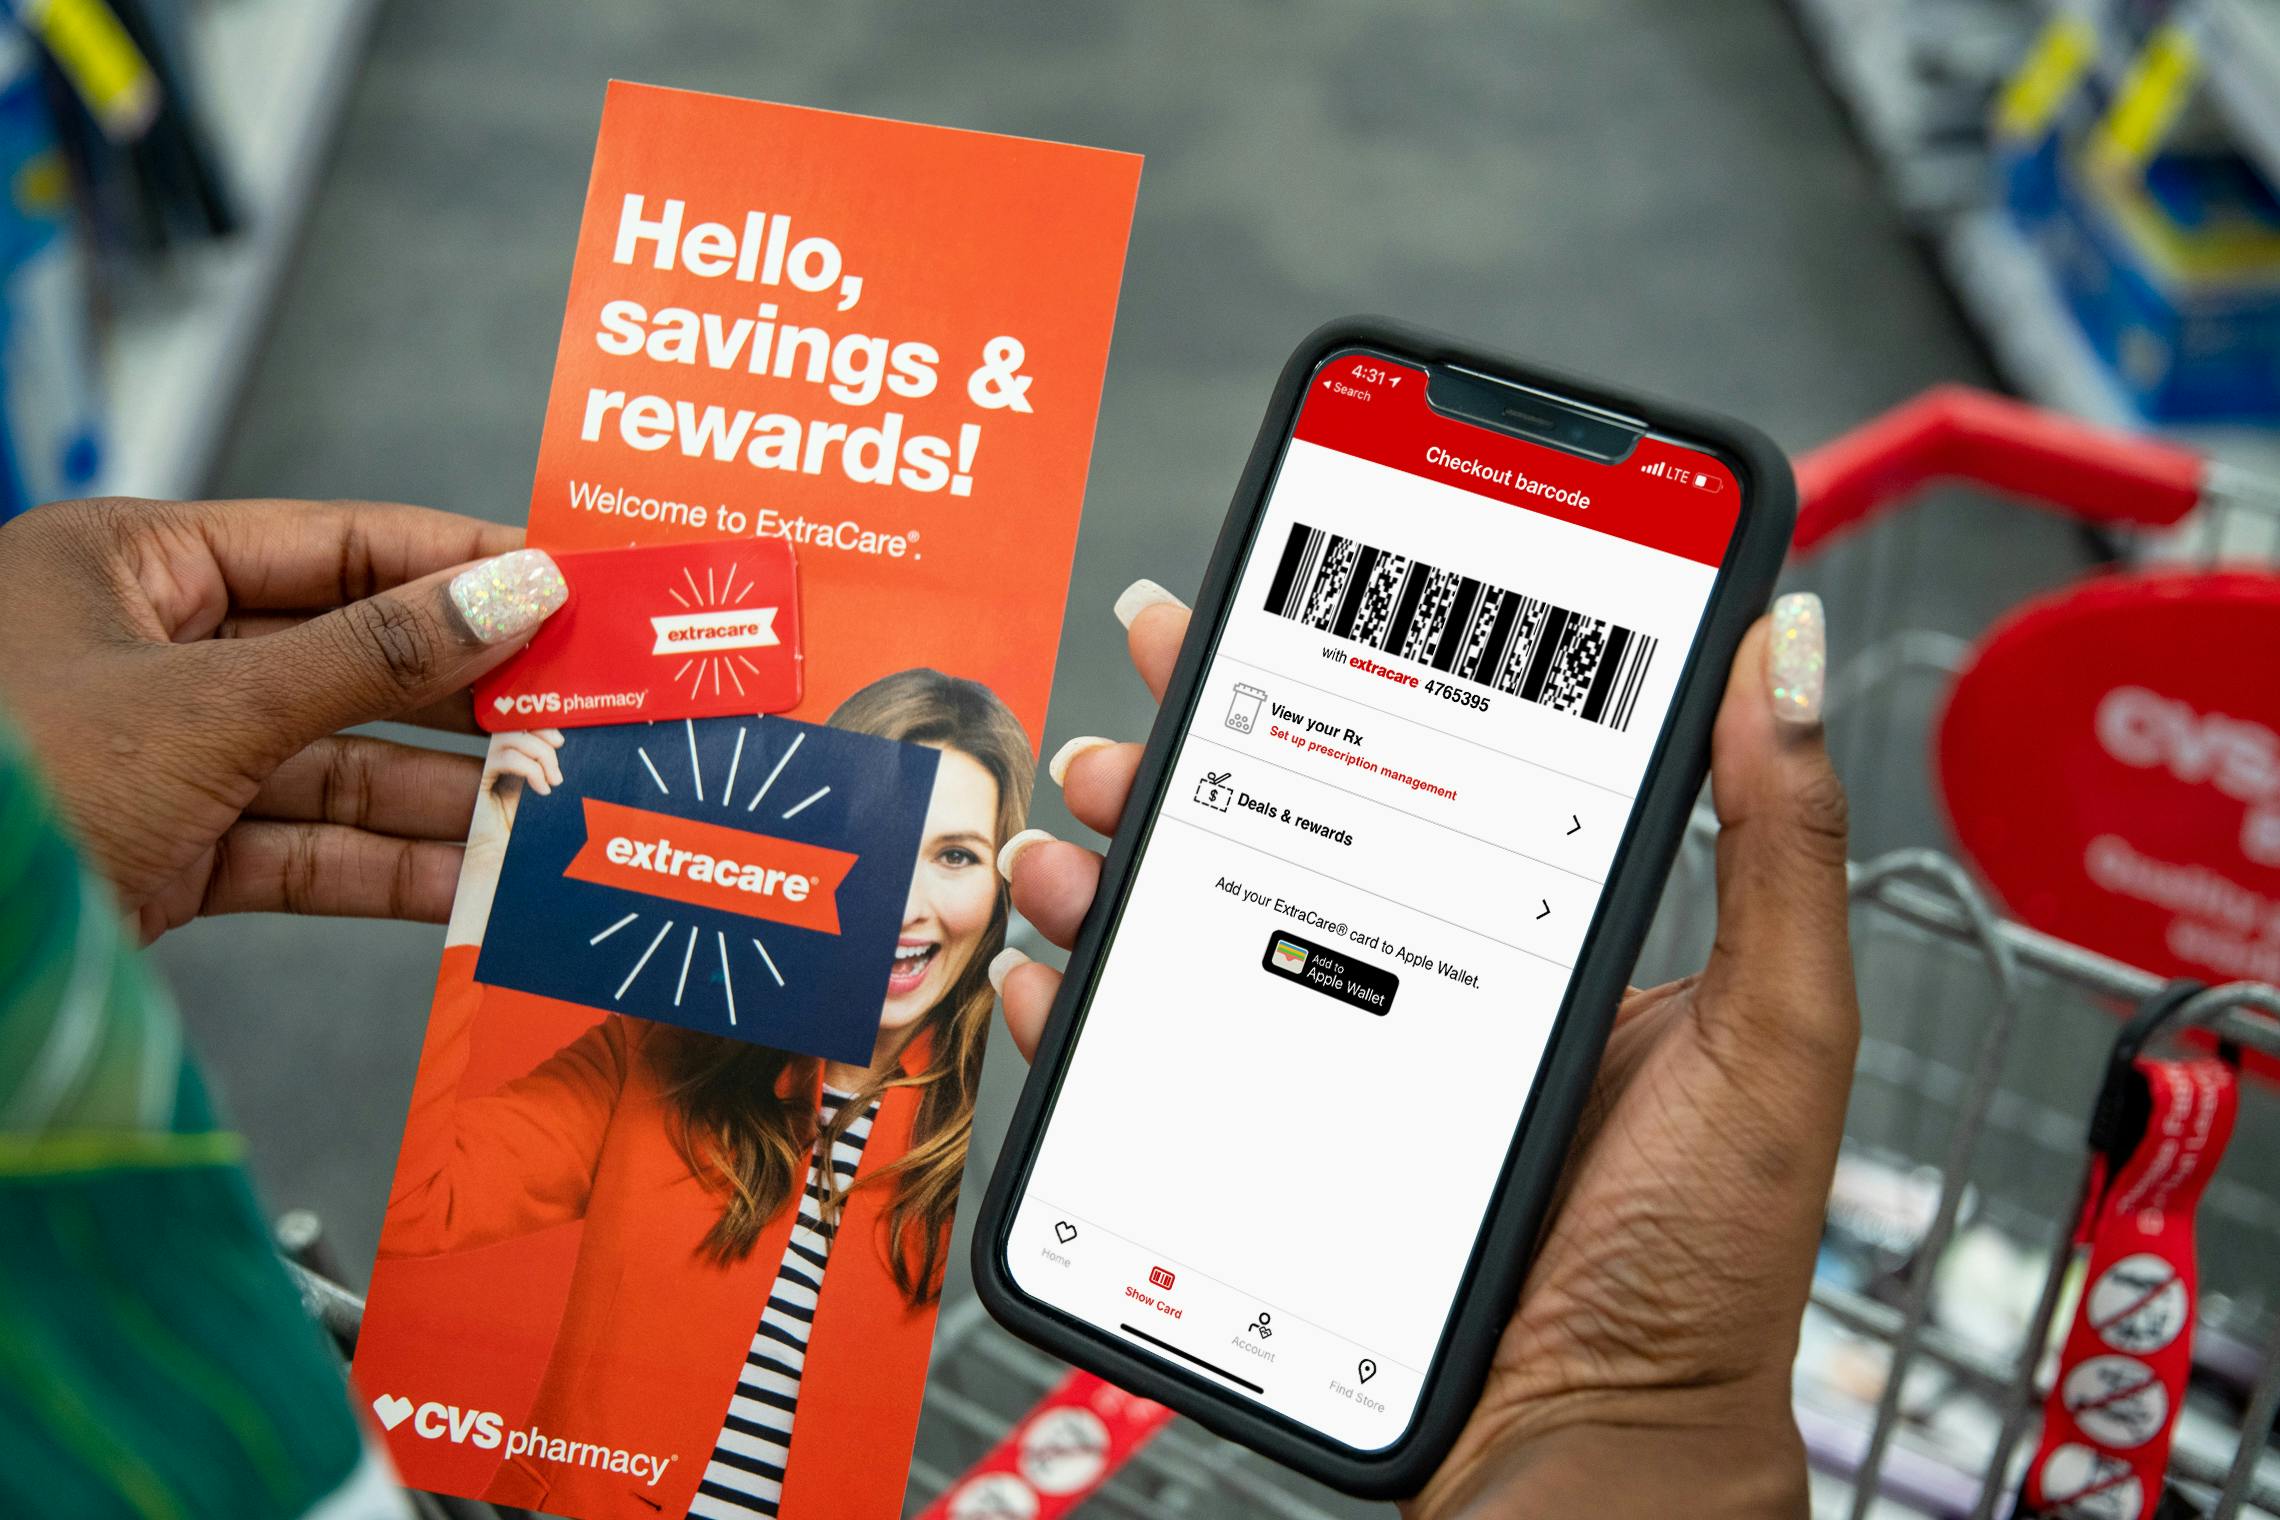 A woman holding an iphone displaying the CVS app, a rewards key chain card, and an extracare rewards pamphlet.